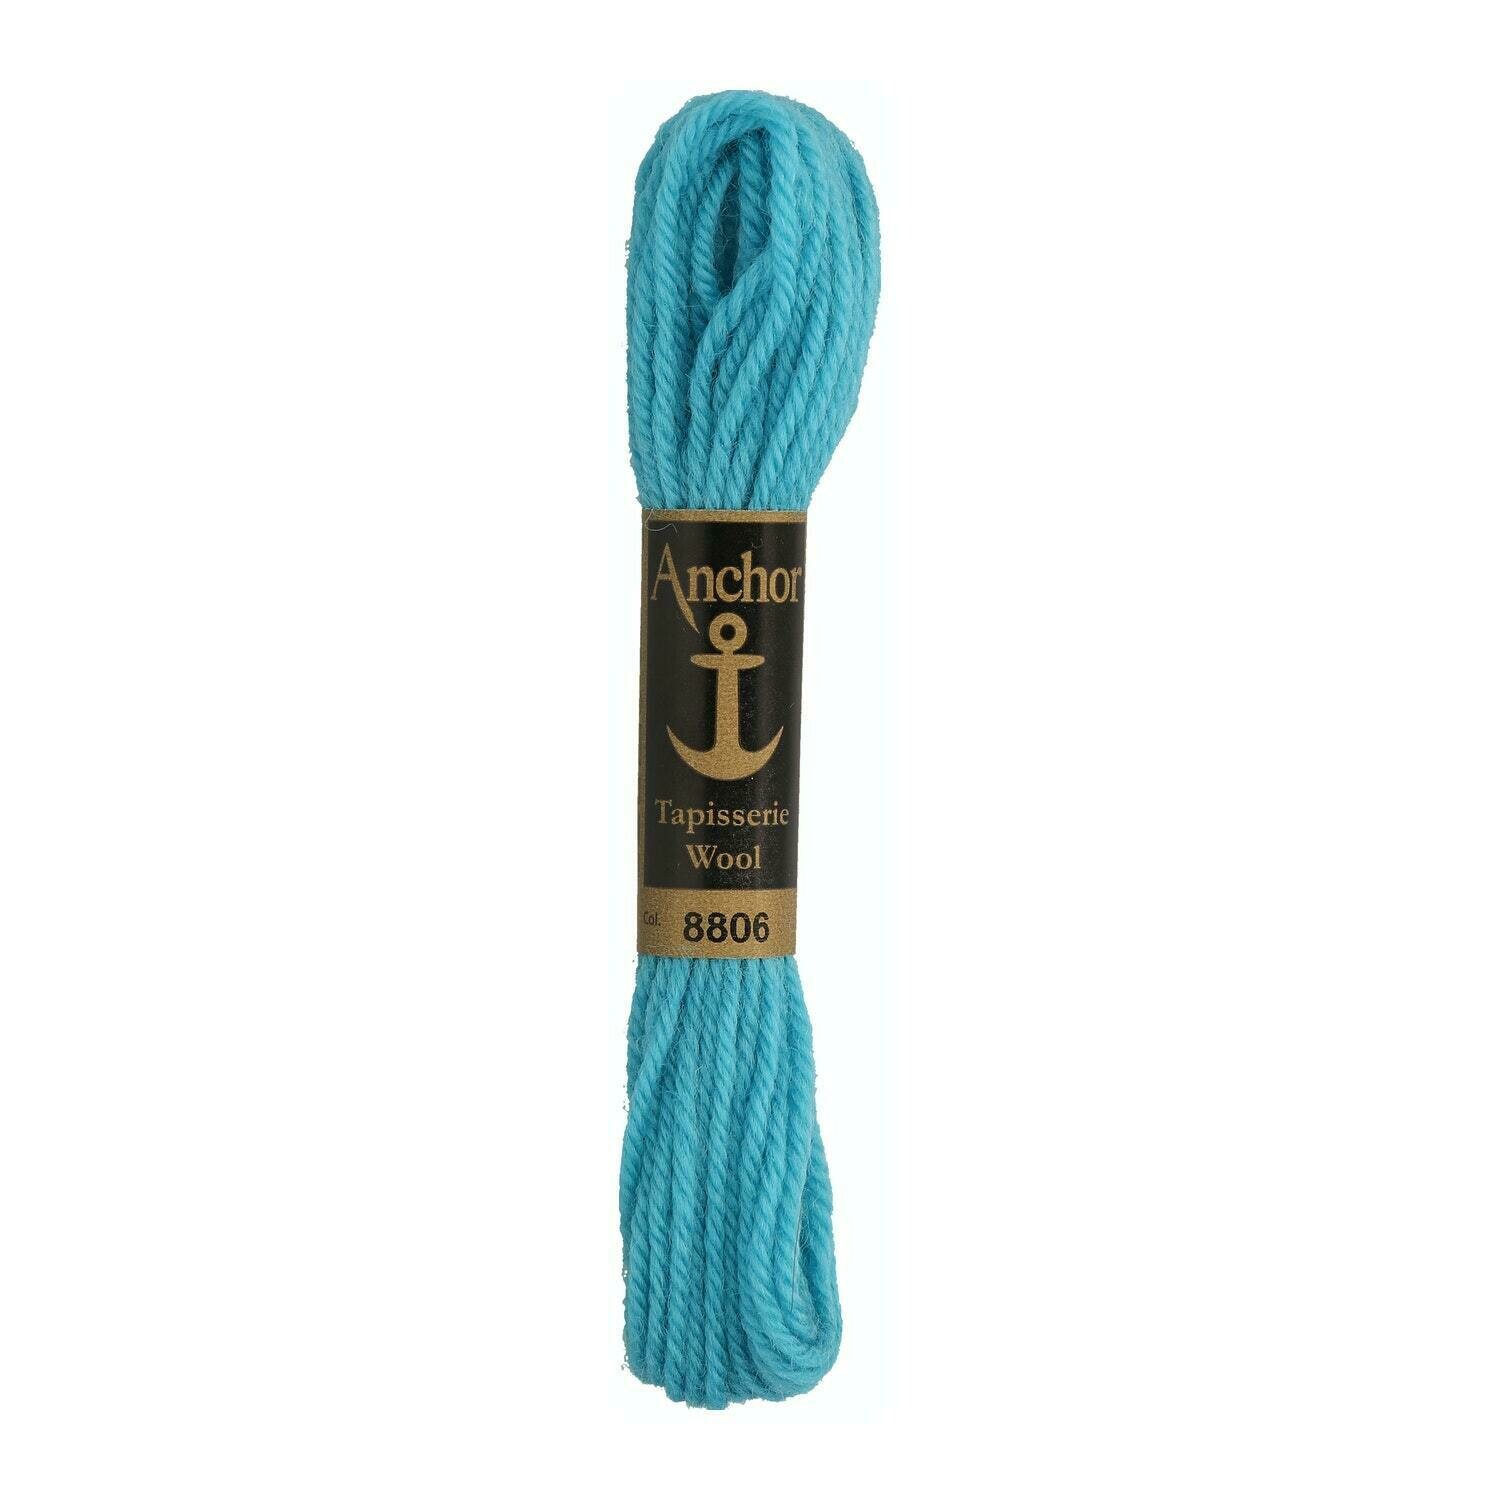 Anchor Tapisserie Wool #08806